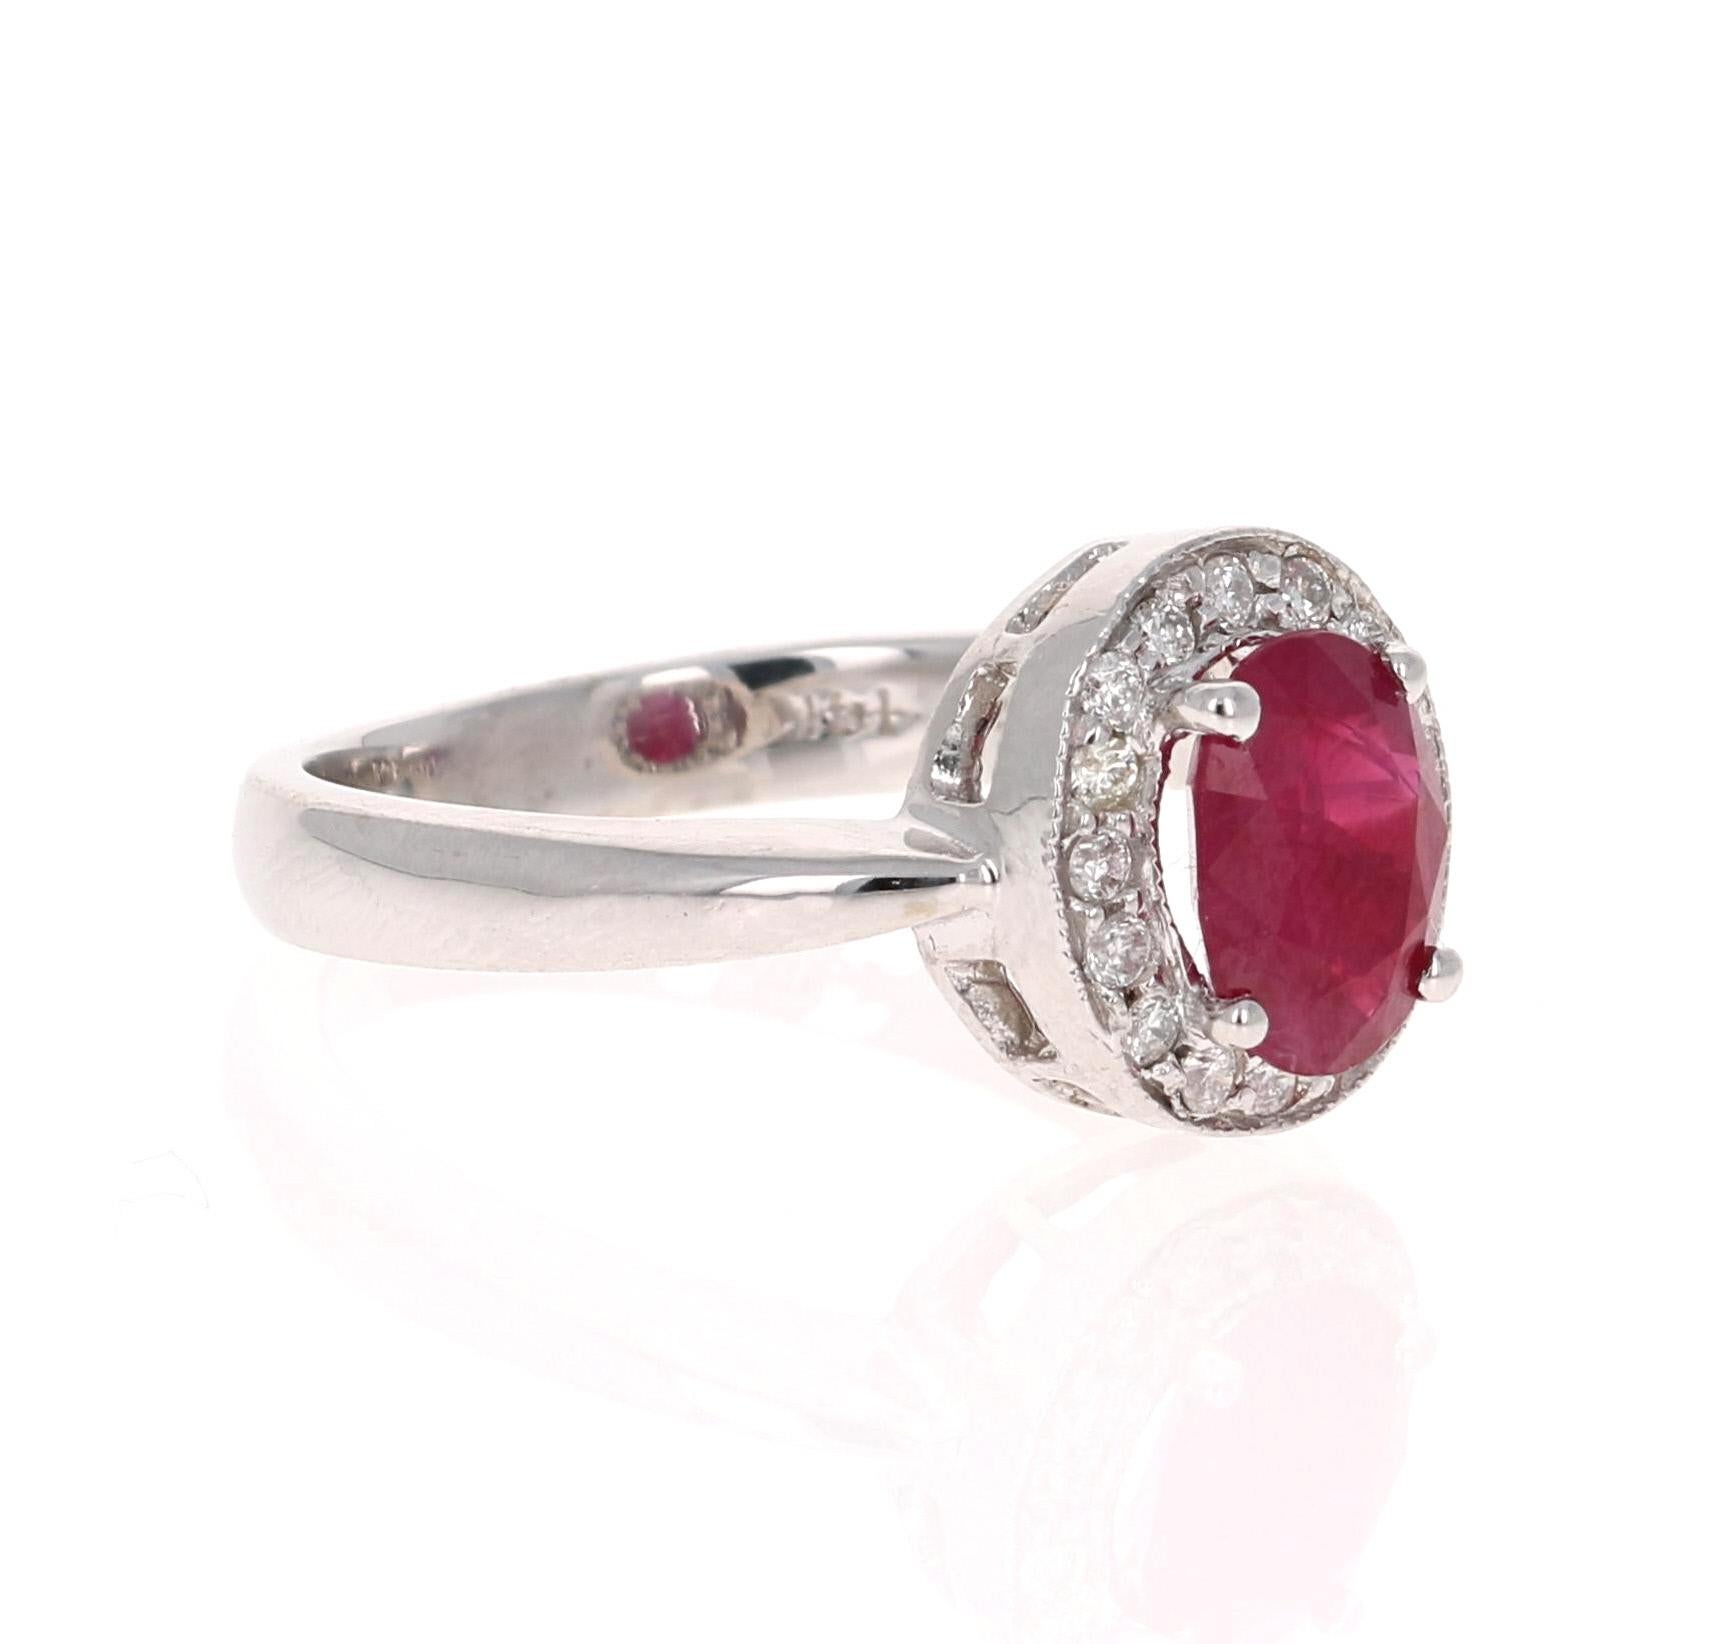 Stunning Ruby Diamond Ring with a 1.45 Carat Oval Cut Ruby and 16 Round Cut Diamonds that weigh 0.18 carats. The total carat weight of the ring is 1.63 carats. (Clarity: SI, Color: F)

The origins of the Ruby are from Mozambique, Africa. The ruby